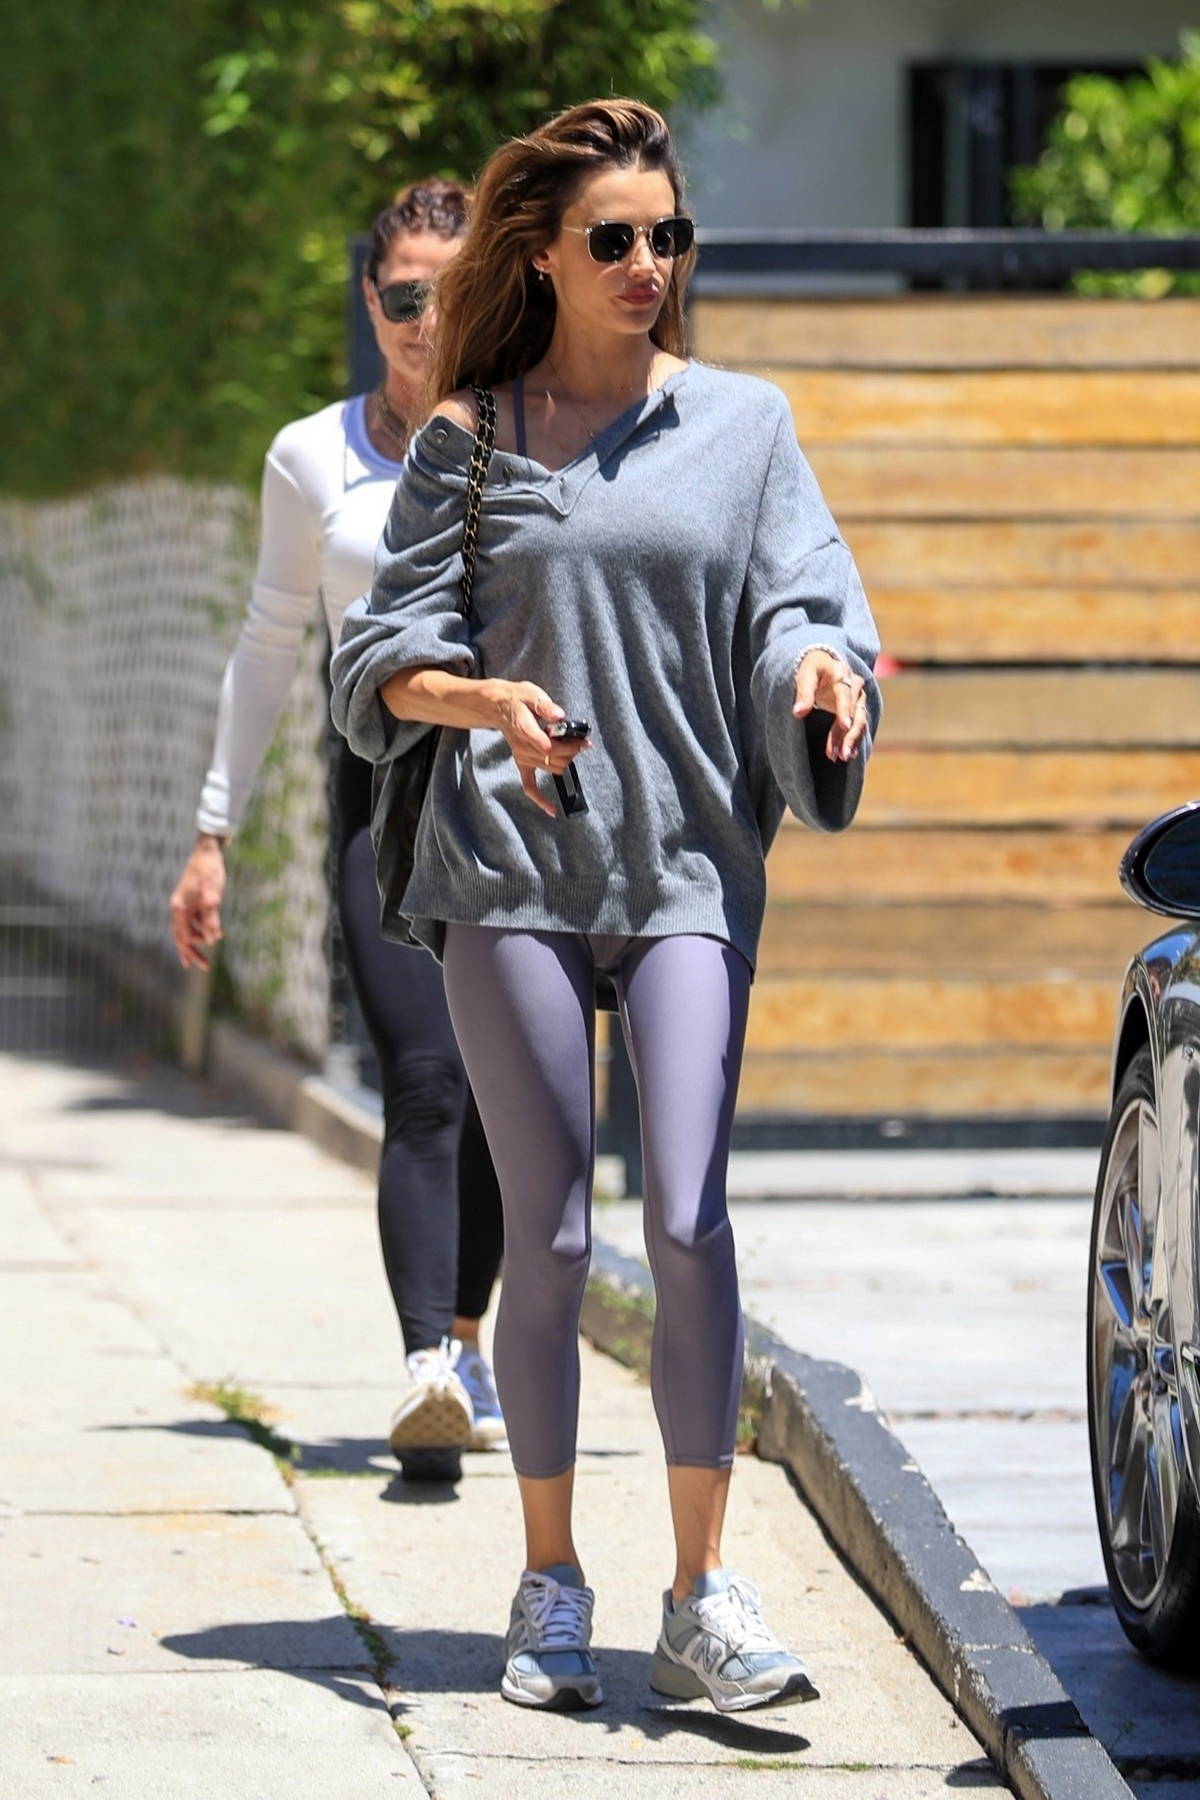 https://www.celebsfirst.com/wp-content/uploads/2023/06/Alessandra-Ambrosio-looks-stunning-in-an-oversized-grey-sweater-and-lavender-leggings-while-leaving-a-gym-in-West-Hollywood-California-200623_17.jpg